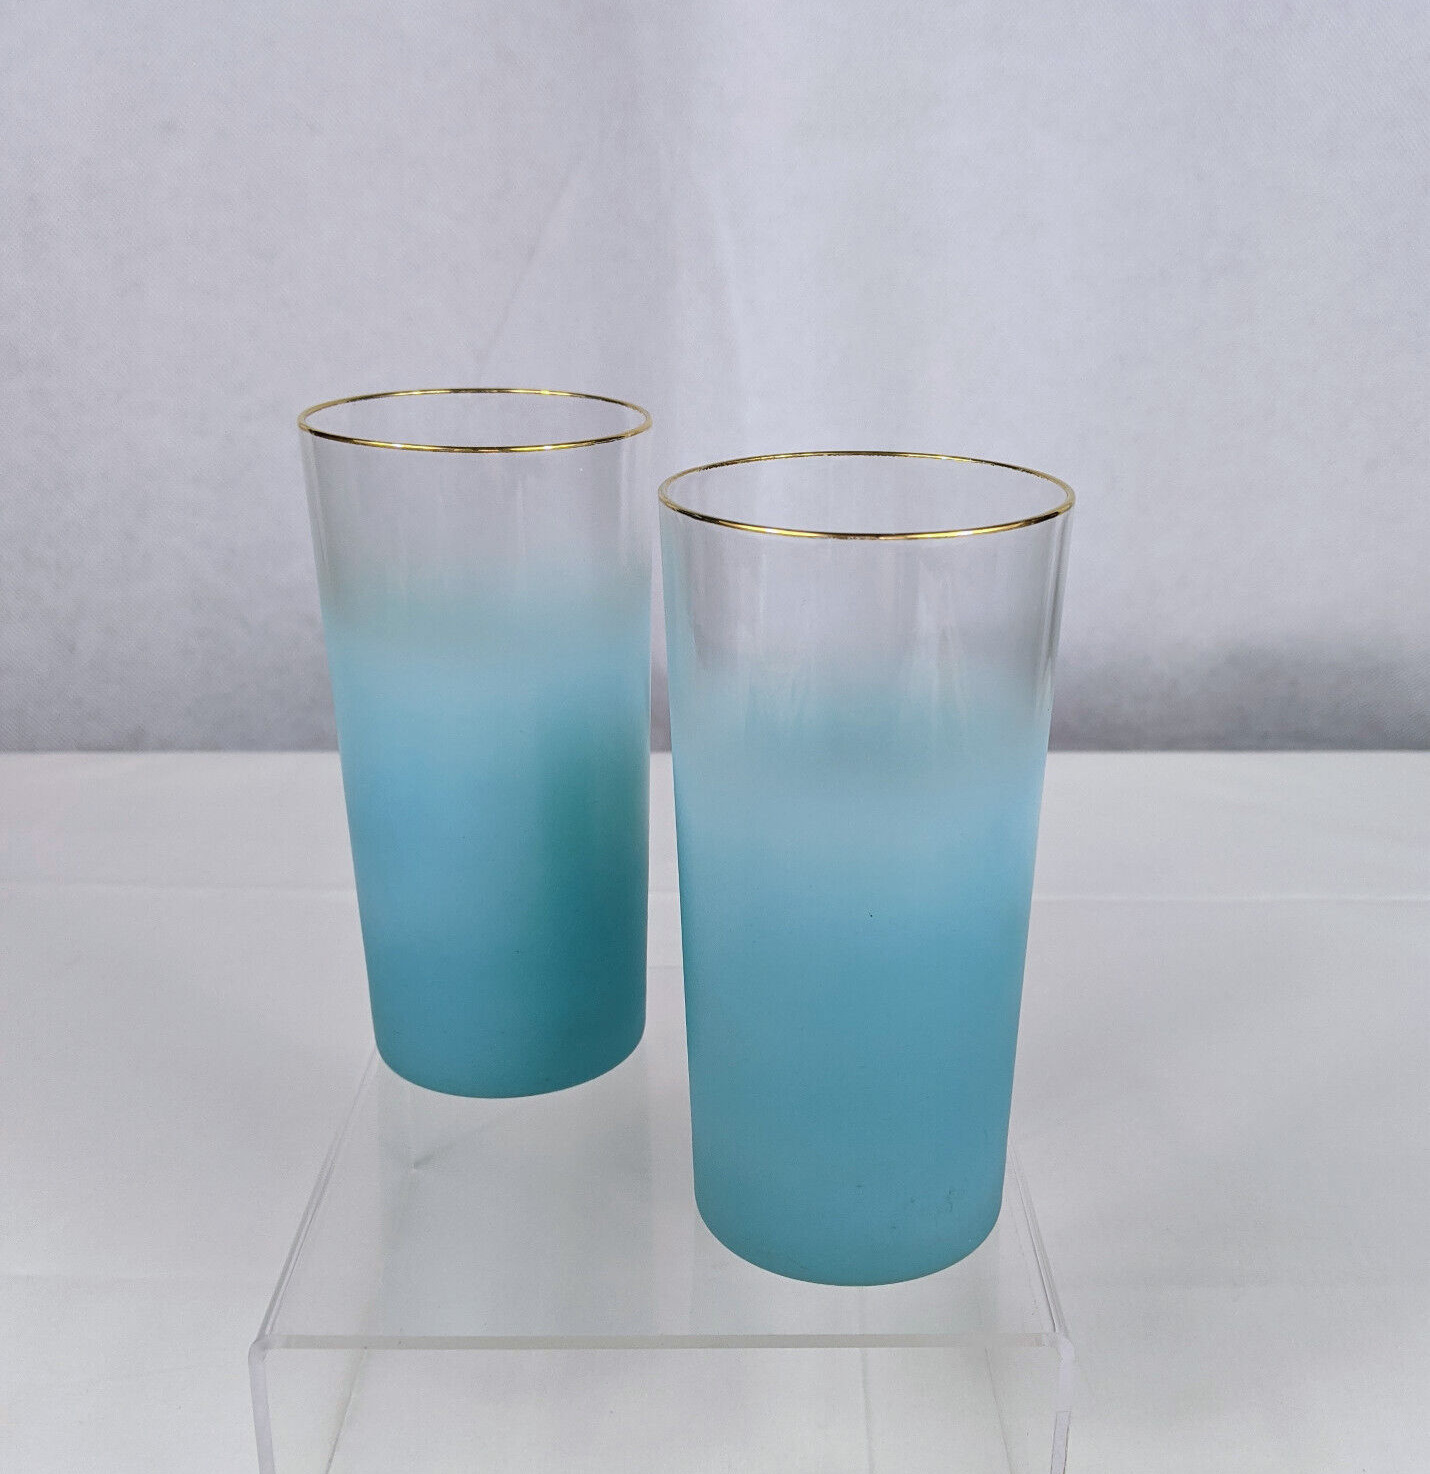 VTG 2 Blendo Blue Frosted Tumblers Drinking Glasses MCM West Virginia Glass